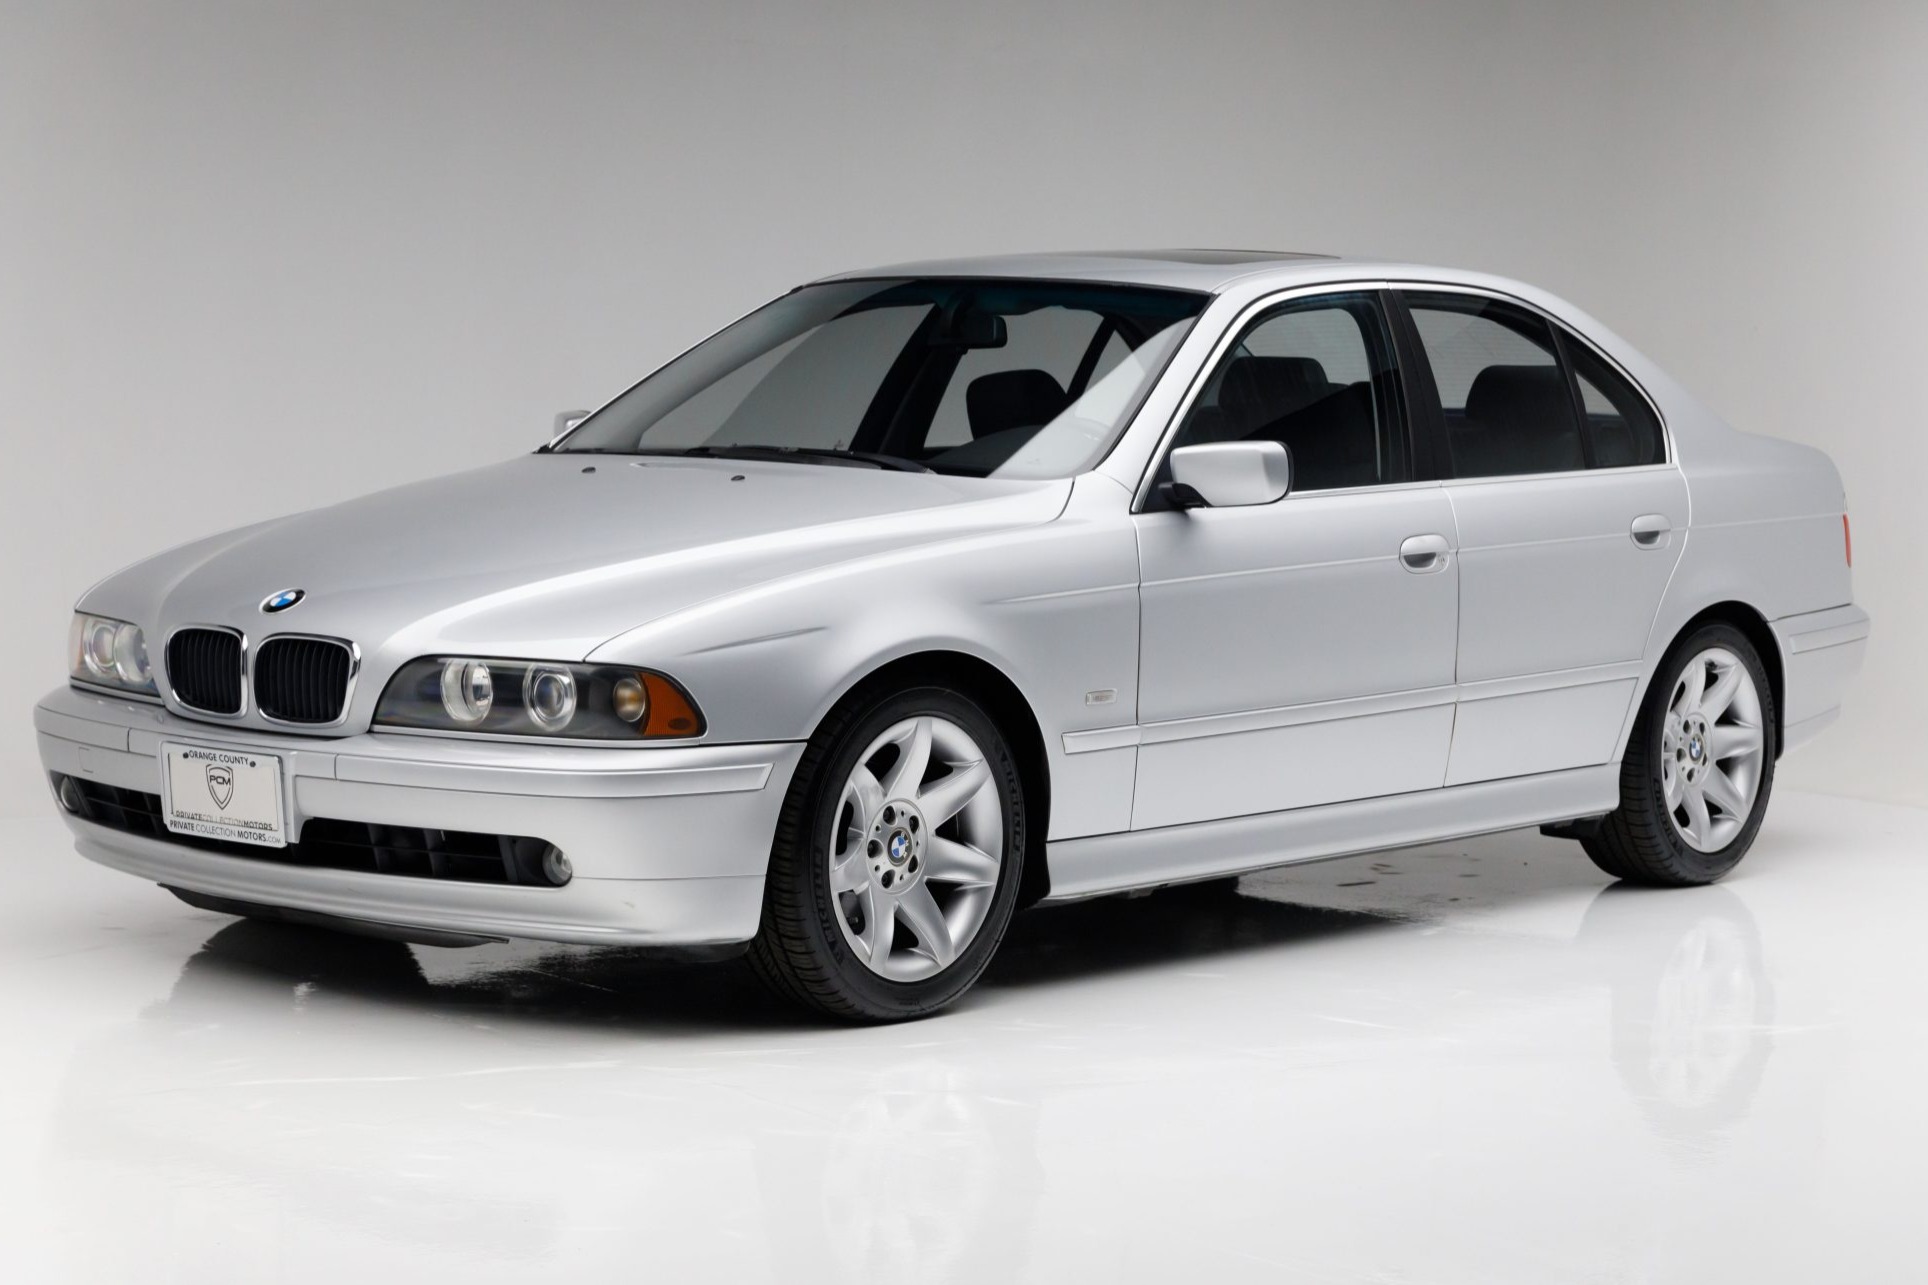 Used 43k-Mile 2002 BMW 525i 5-Speed Review